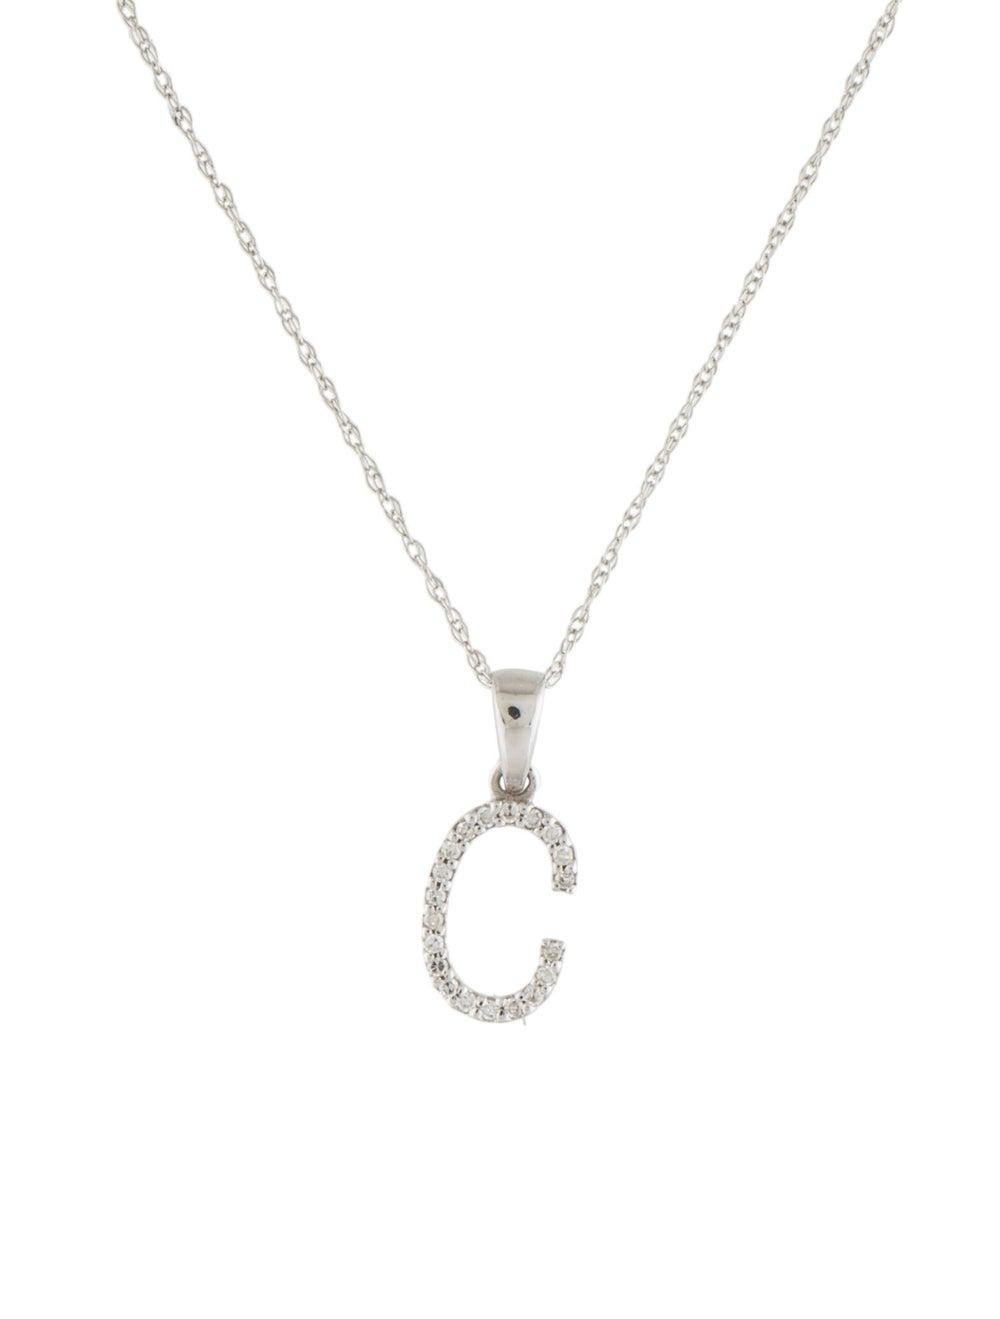 This is an adorable Initial Letter Necklace crafted of 14k Gold with approximately 0.06 ct. Round Sparkly Diamonds depending on the initial. Diamond Color and Clarity GH-SI1-SI2. Comes on an 16